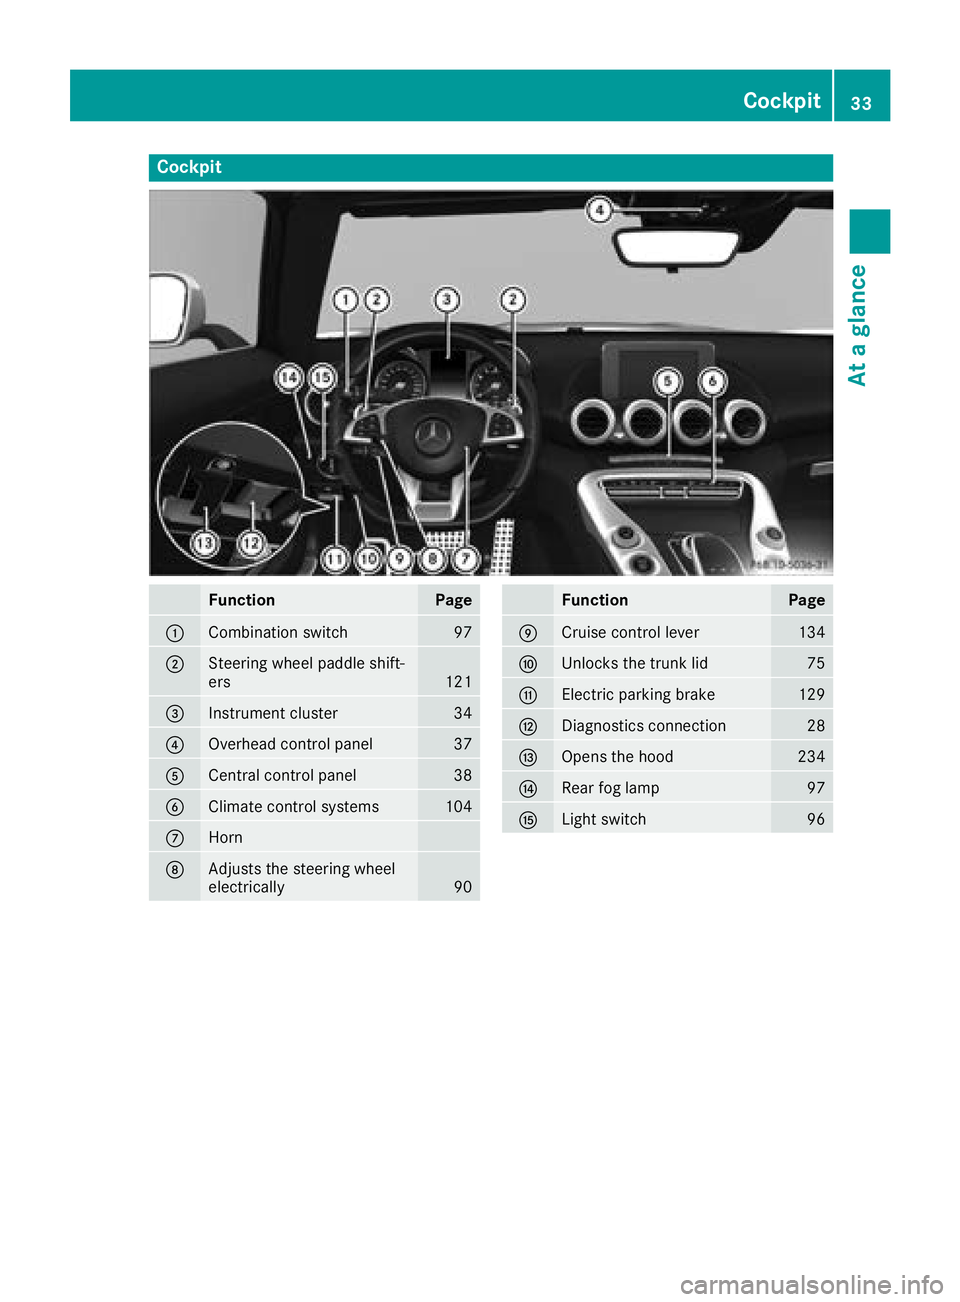 MERCEDES-BENZ AMG GT ROADSTER 2018  Owners Manual Cockpit
FunctionPage
:Combination switch97
;Steering wheel paddle shift-
ers121
=Instrument cluster34
?Overhead control panel37
ACentral control panel38
BClimate control systems104
CHorn
DAdjusts the 